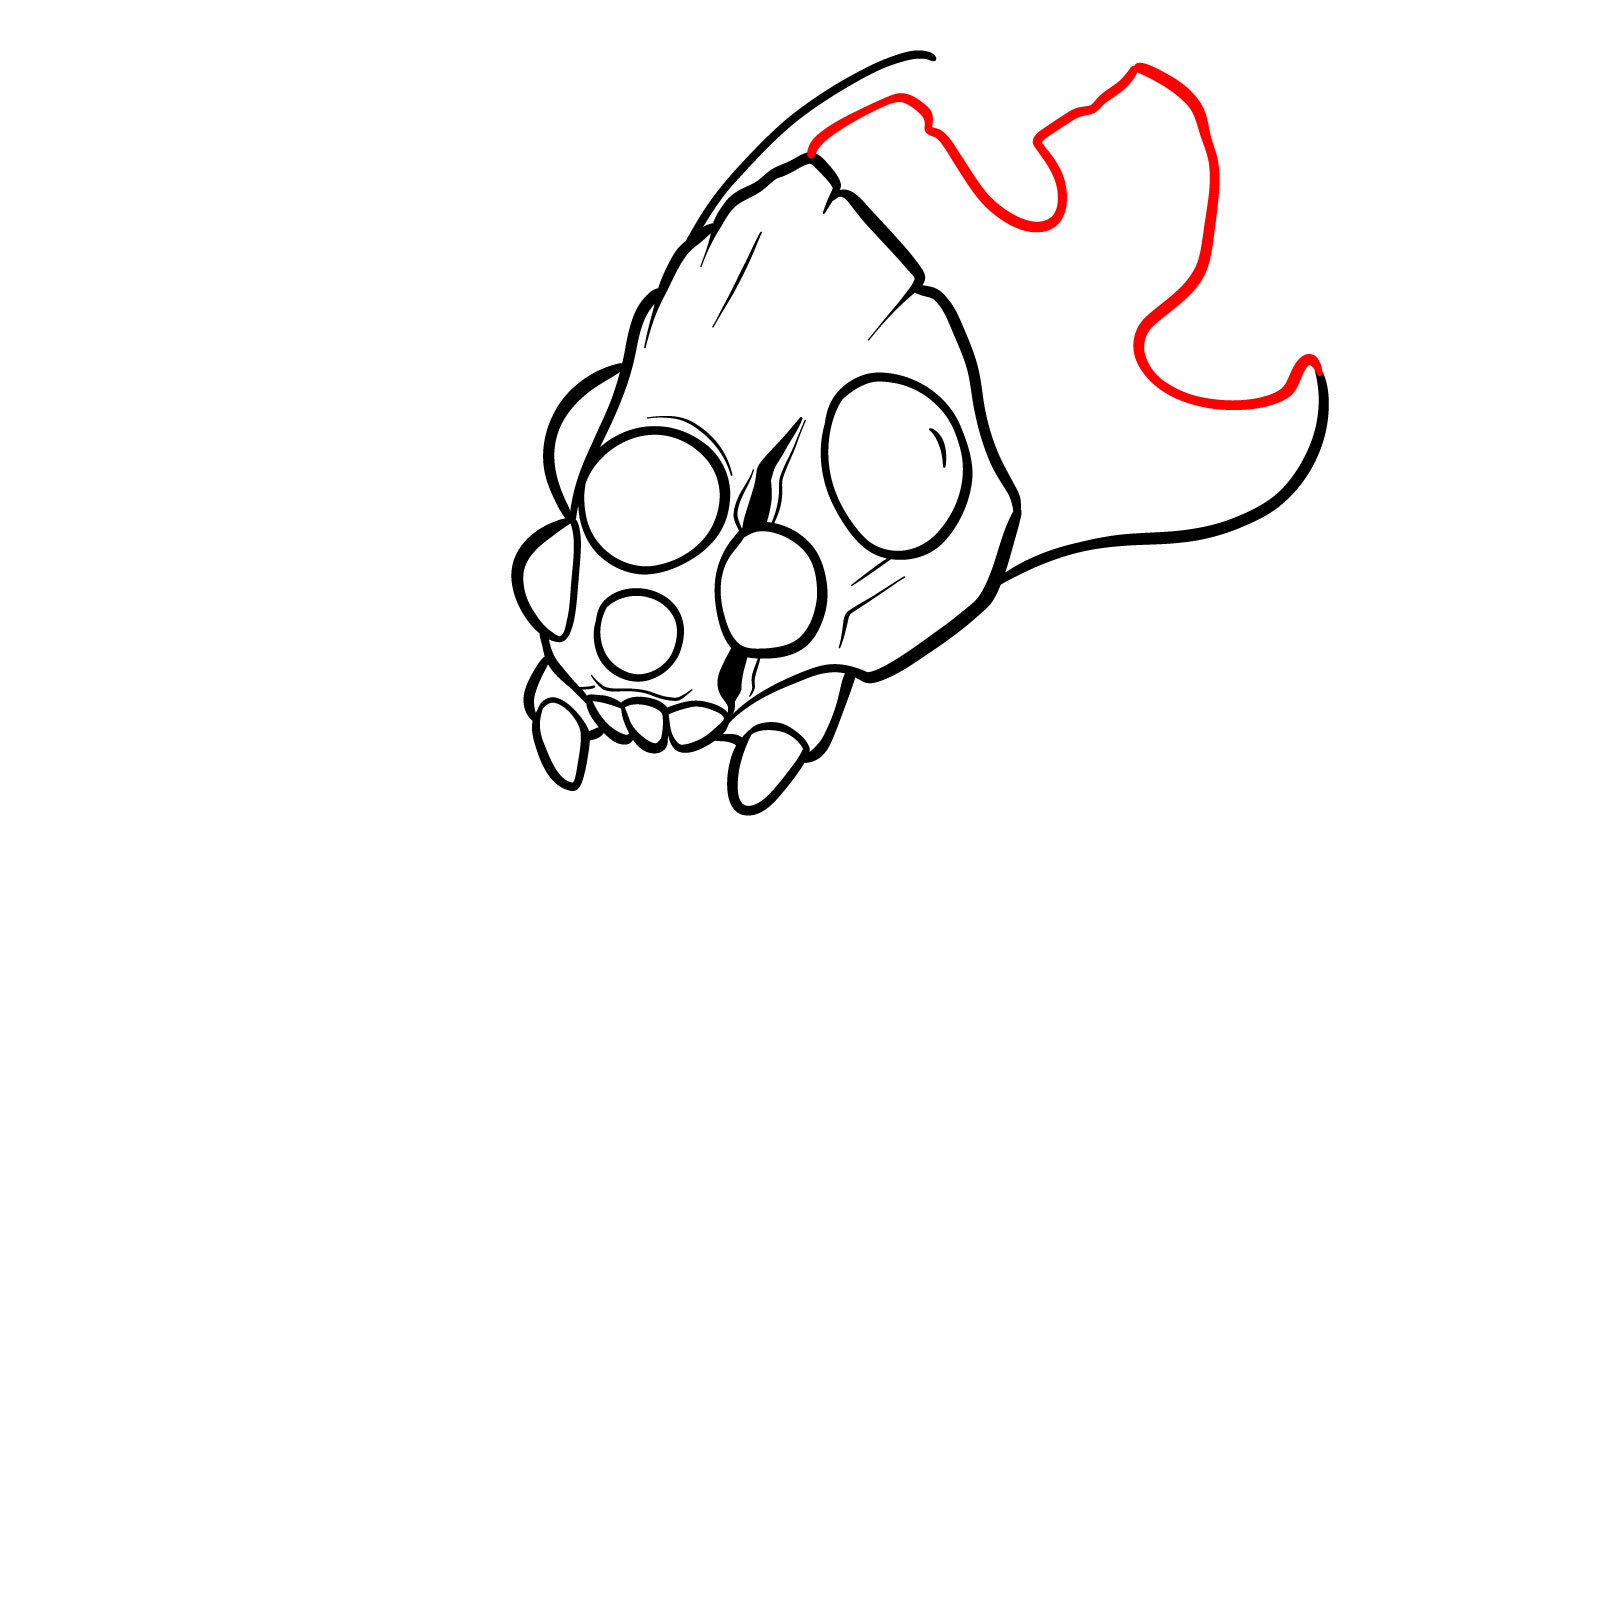 How to draw Baron Nashor from League of Legends - step 11